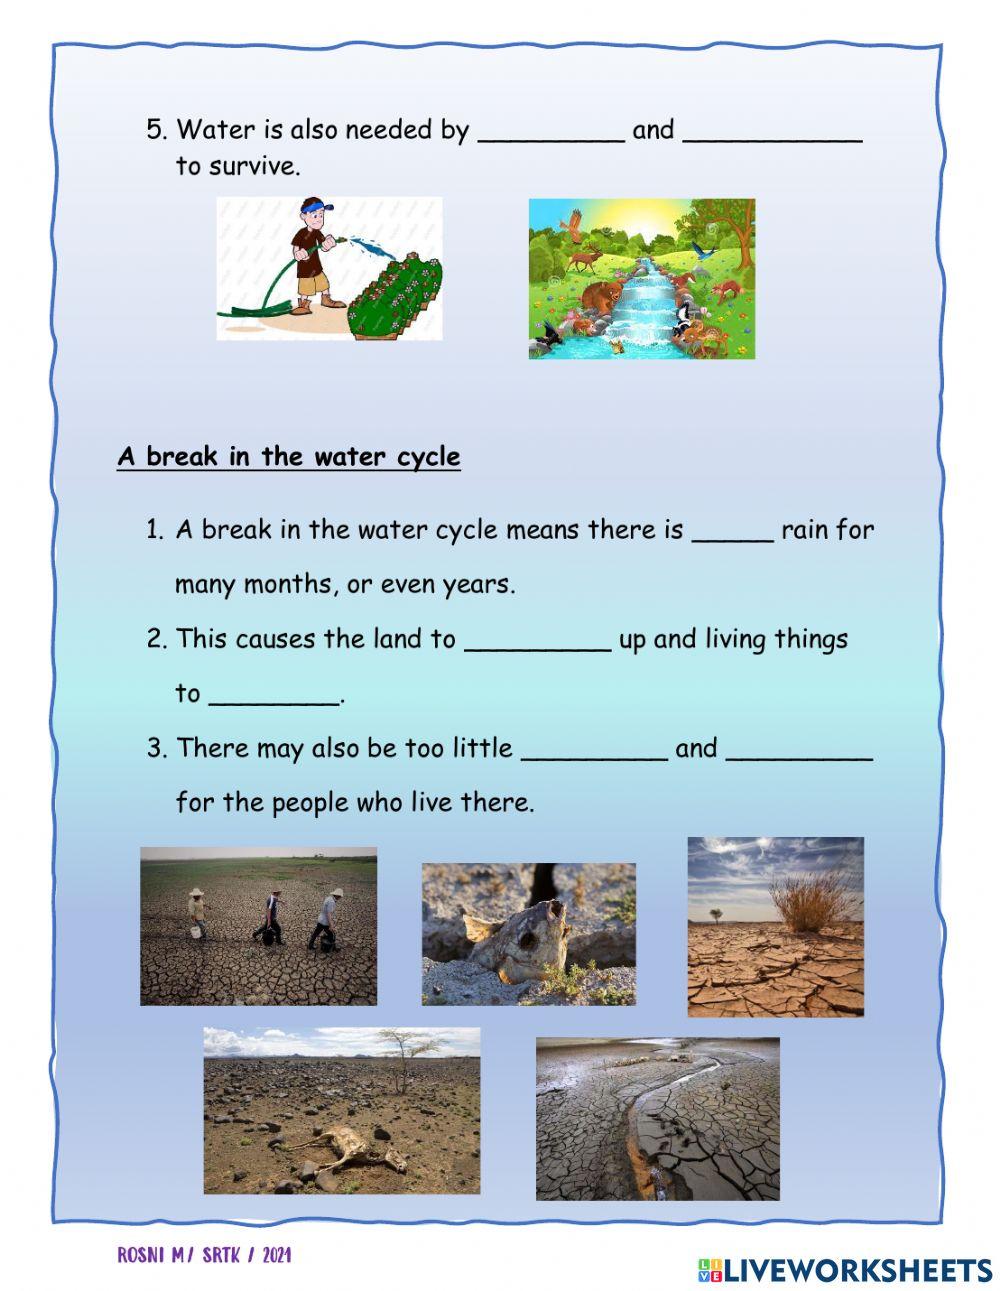 Importance of water & a break in the water cycle